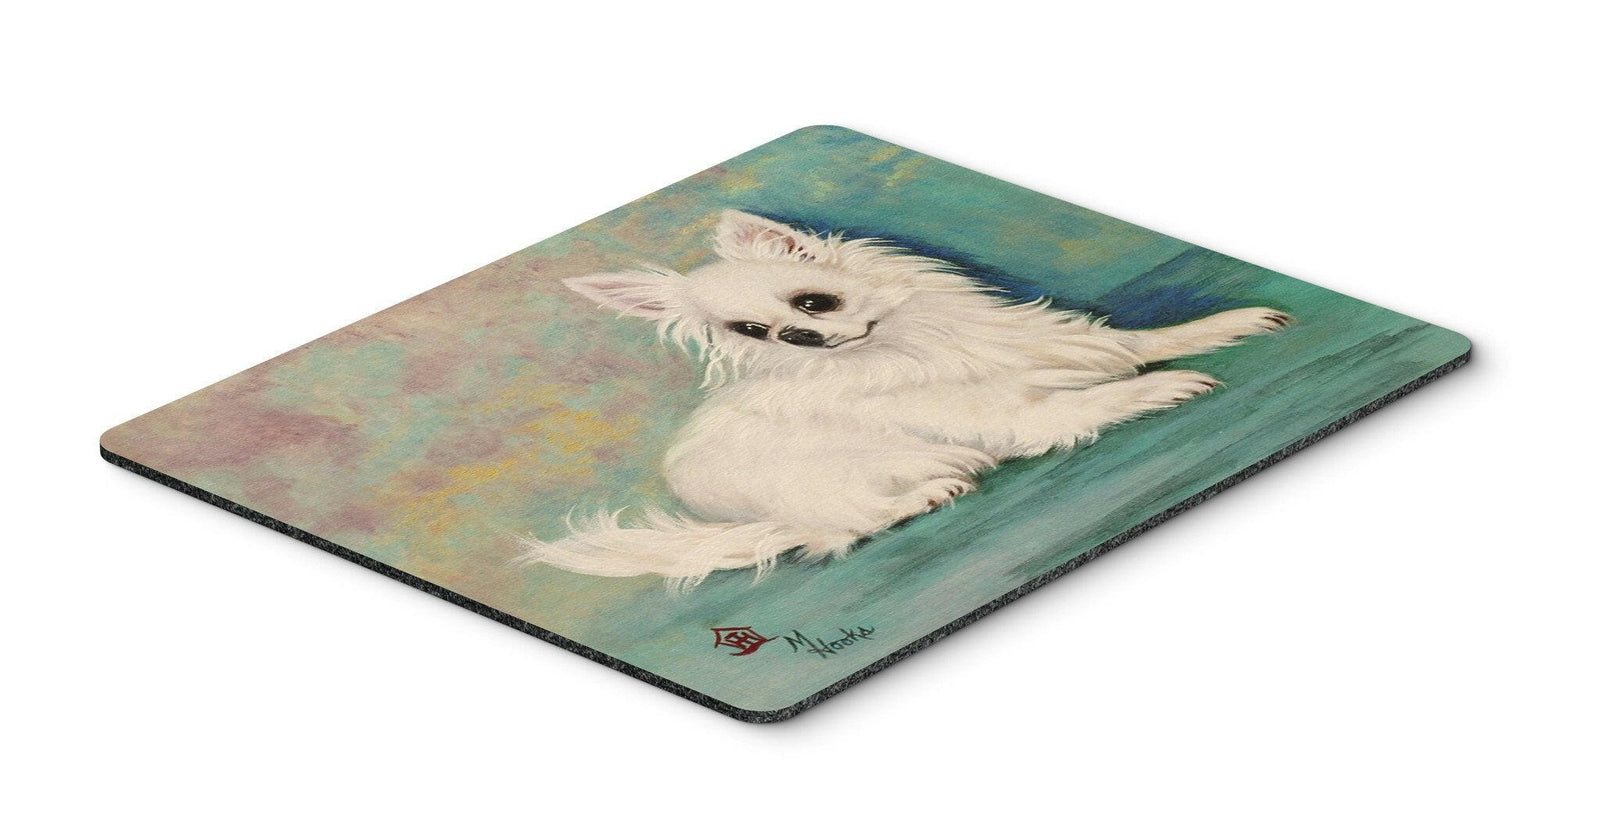 Chihuahua Queen Mother Mouse Pad, Hot Pad or Trivet MH1057MP by Caroline's Treasures